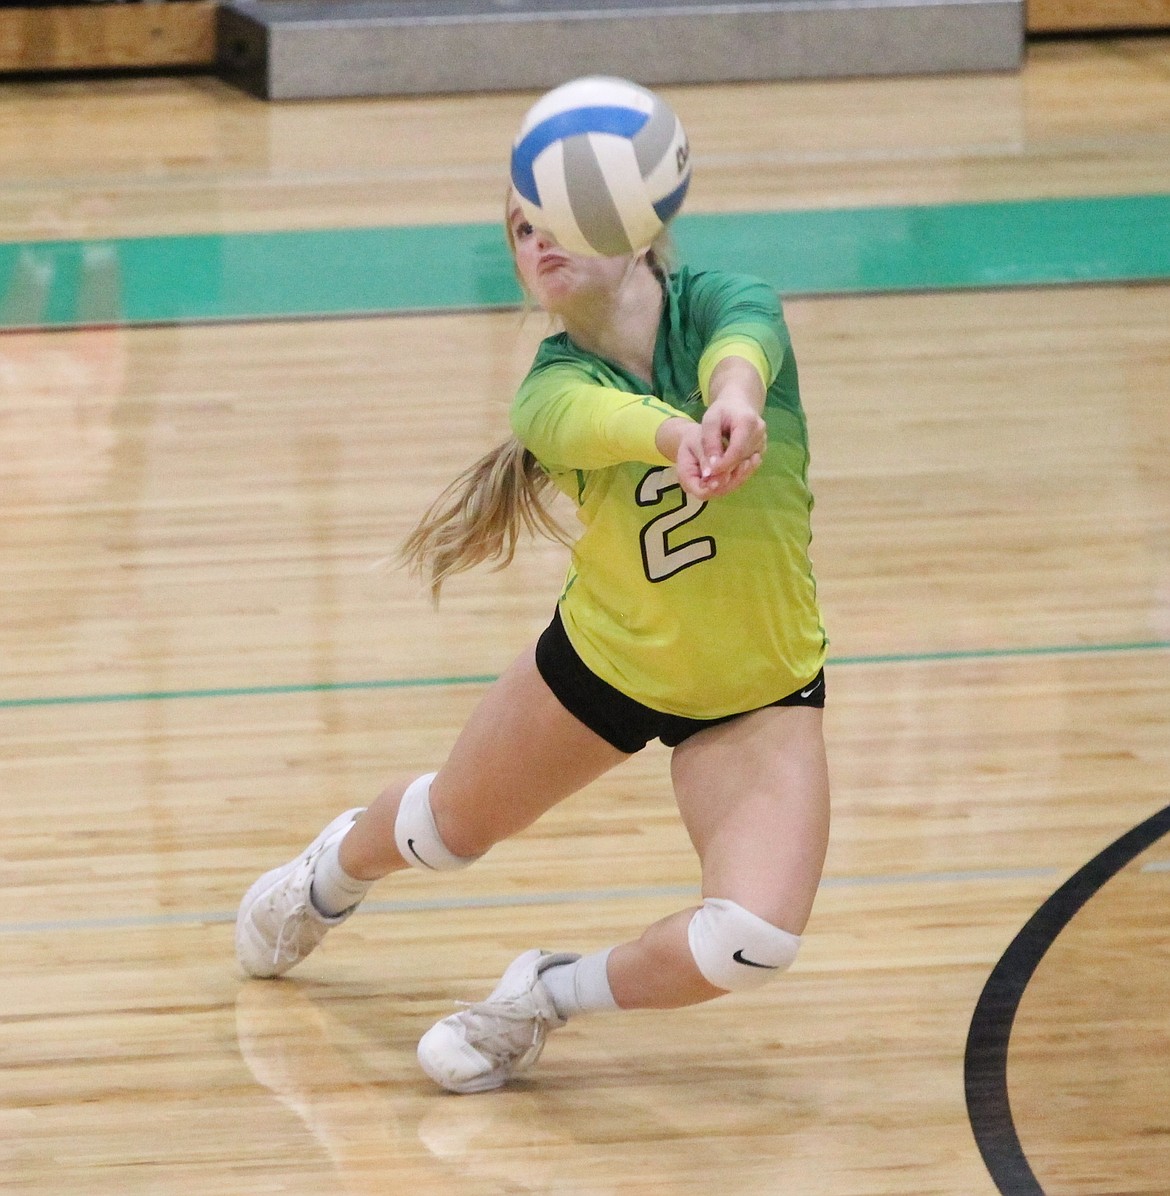 MARK NELKE/Press
Emily Morlan of Lakeland passes during the 4A Region 1 volleyball championship match vs. Moscow on Thursday night at Hawk Court in Rathdrum.